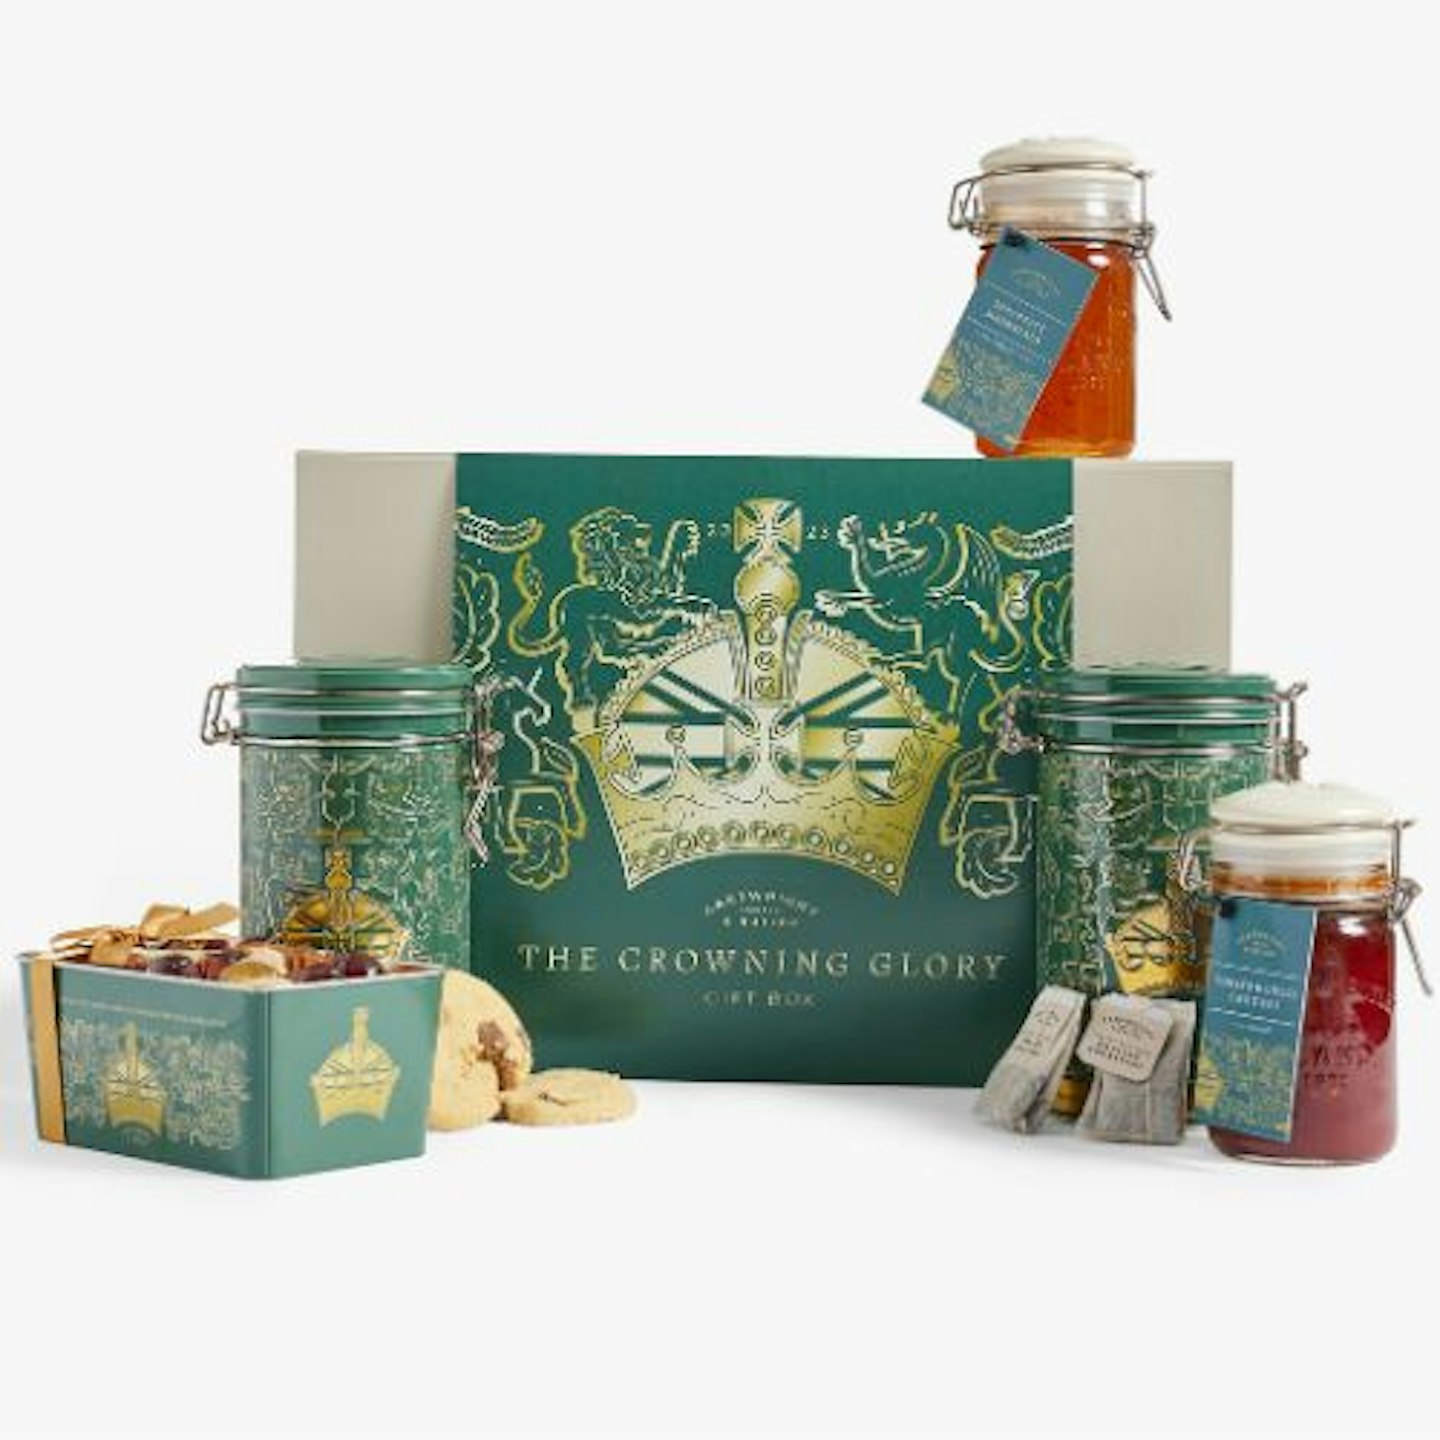 The Crowning Glory Gift Box